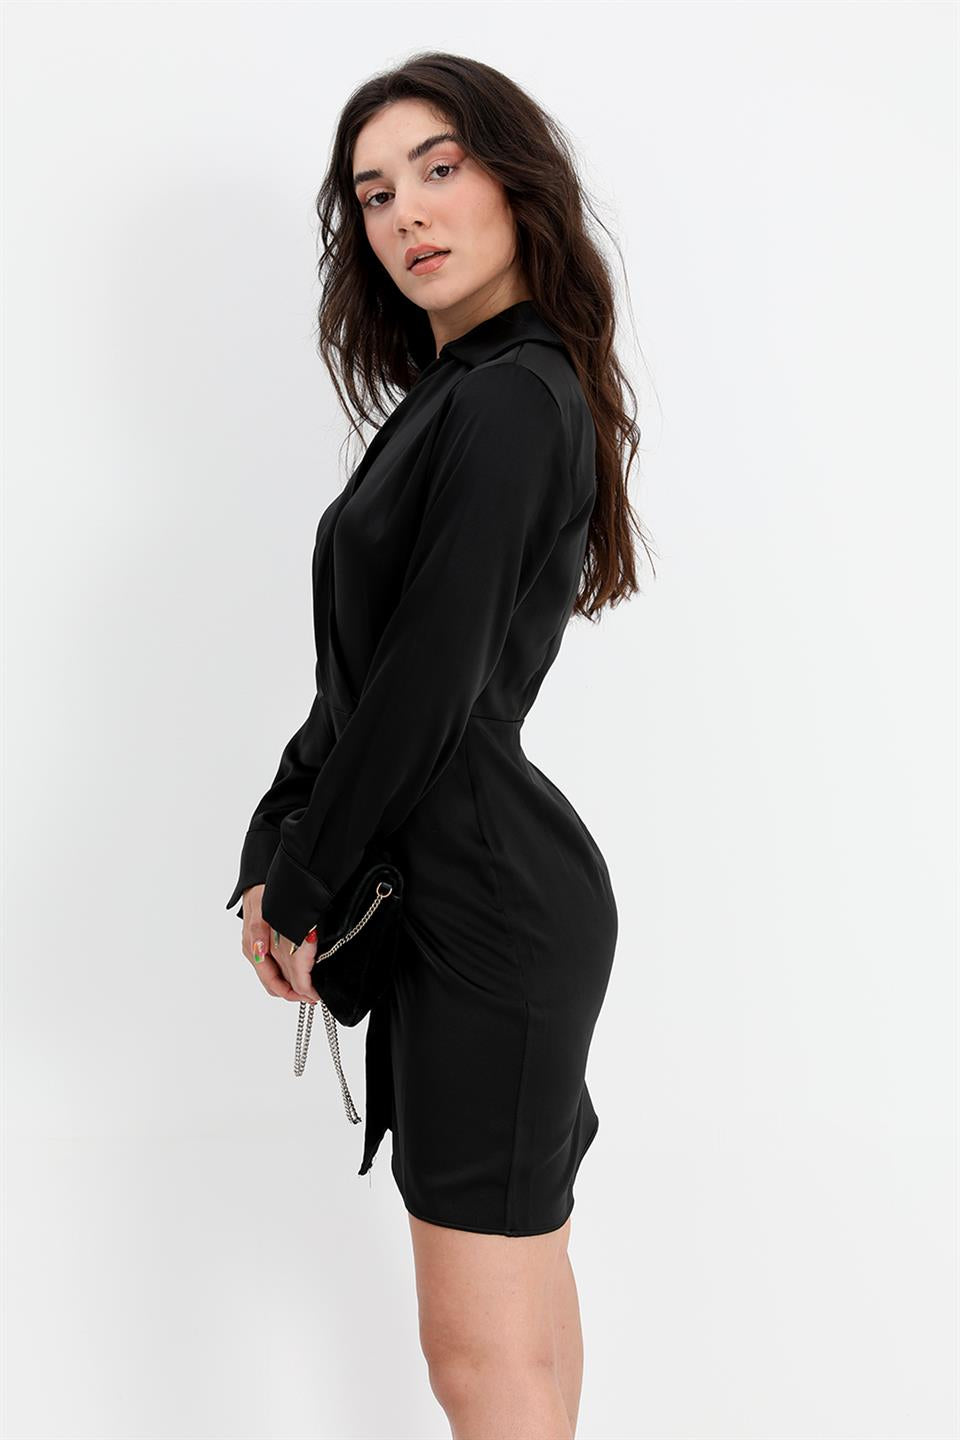 Women's Dress Double Breasted Collar Buttoned Satin - Black - STREETMODE™